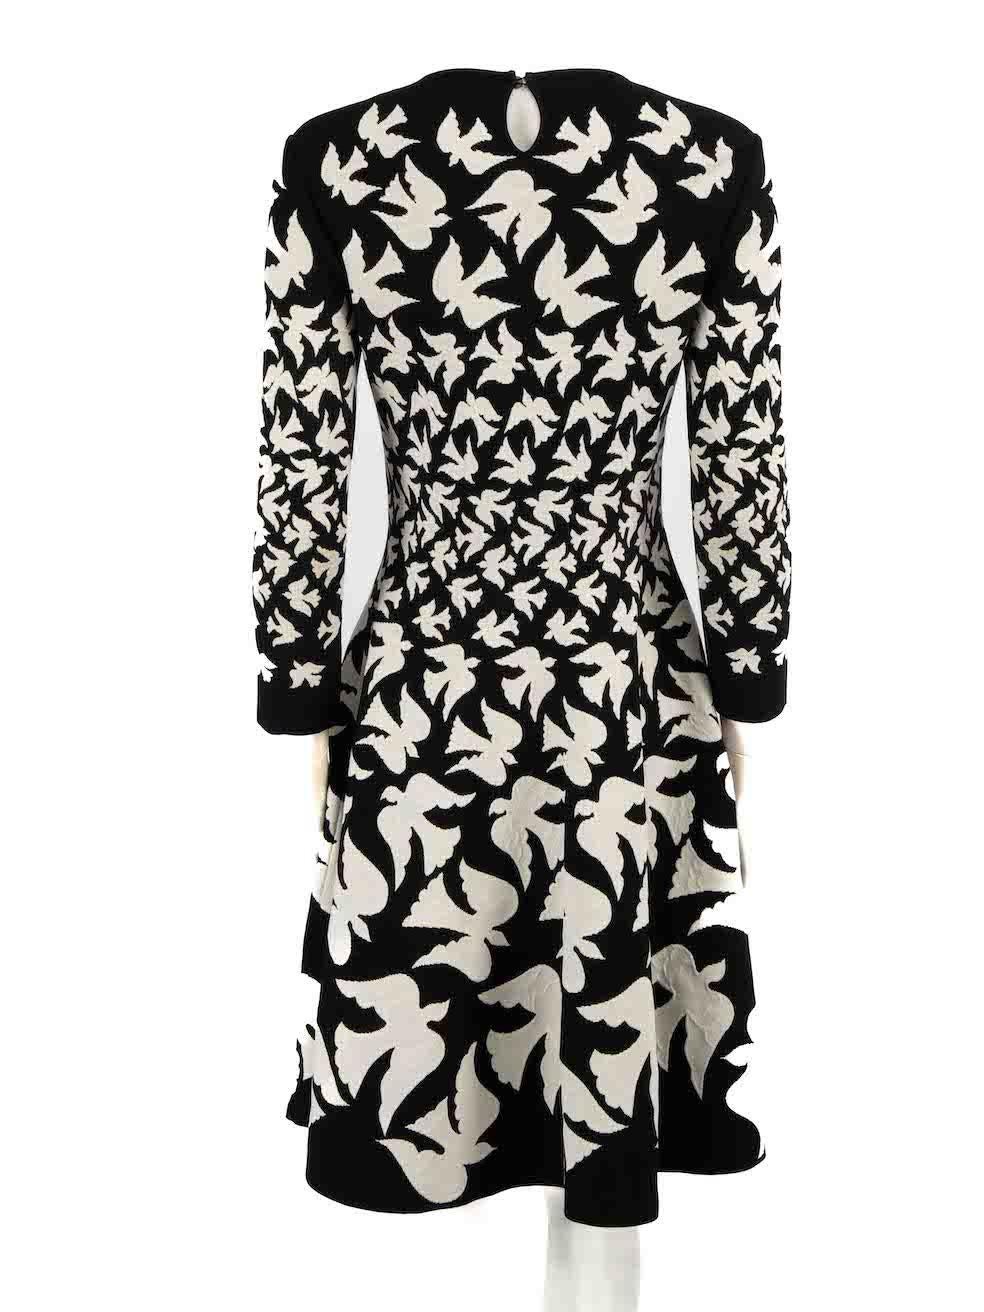 Alexander McQueen Black Knit Bird Print Dress Size M In Excellent Condition For Sale In London, GB